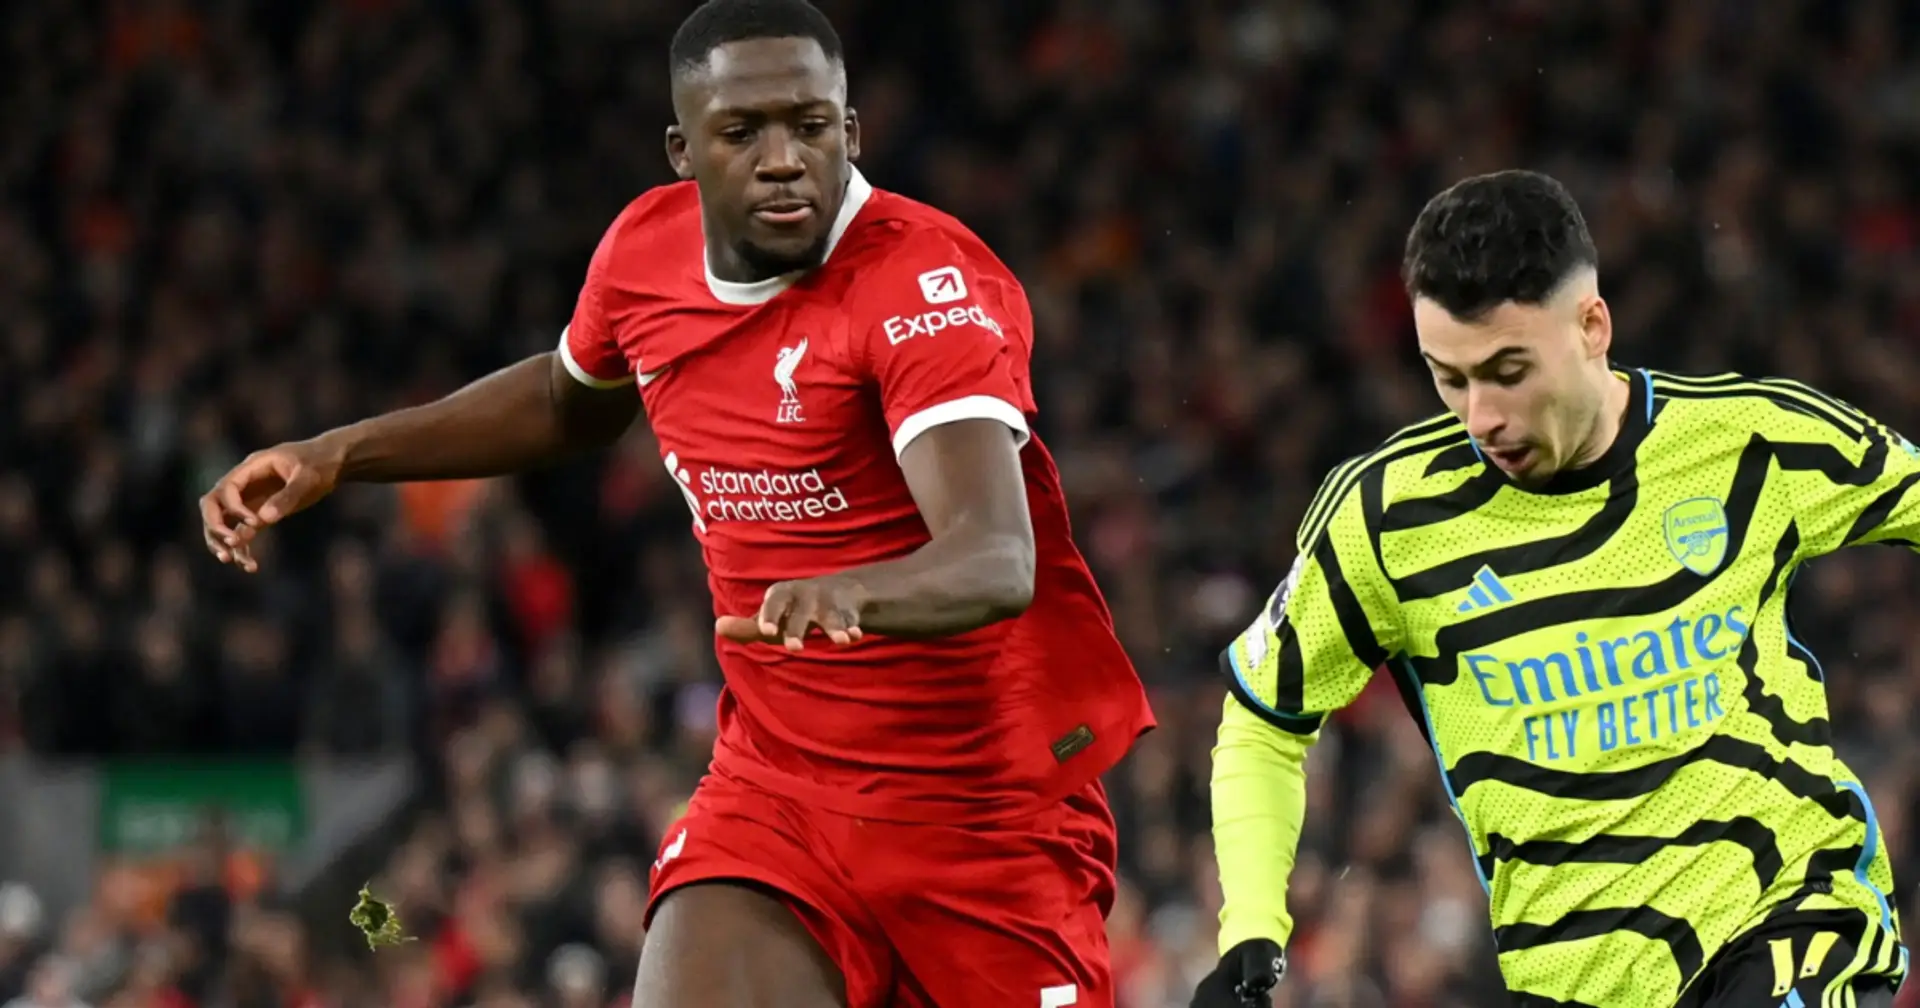 Konate 9, Gakpo 5: rating Liverpool players in Arsenal draw